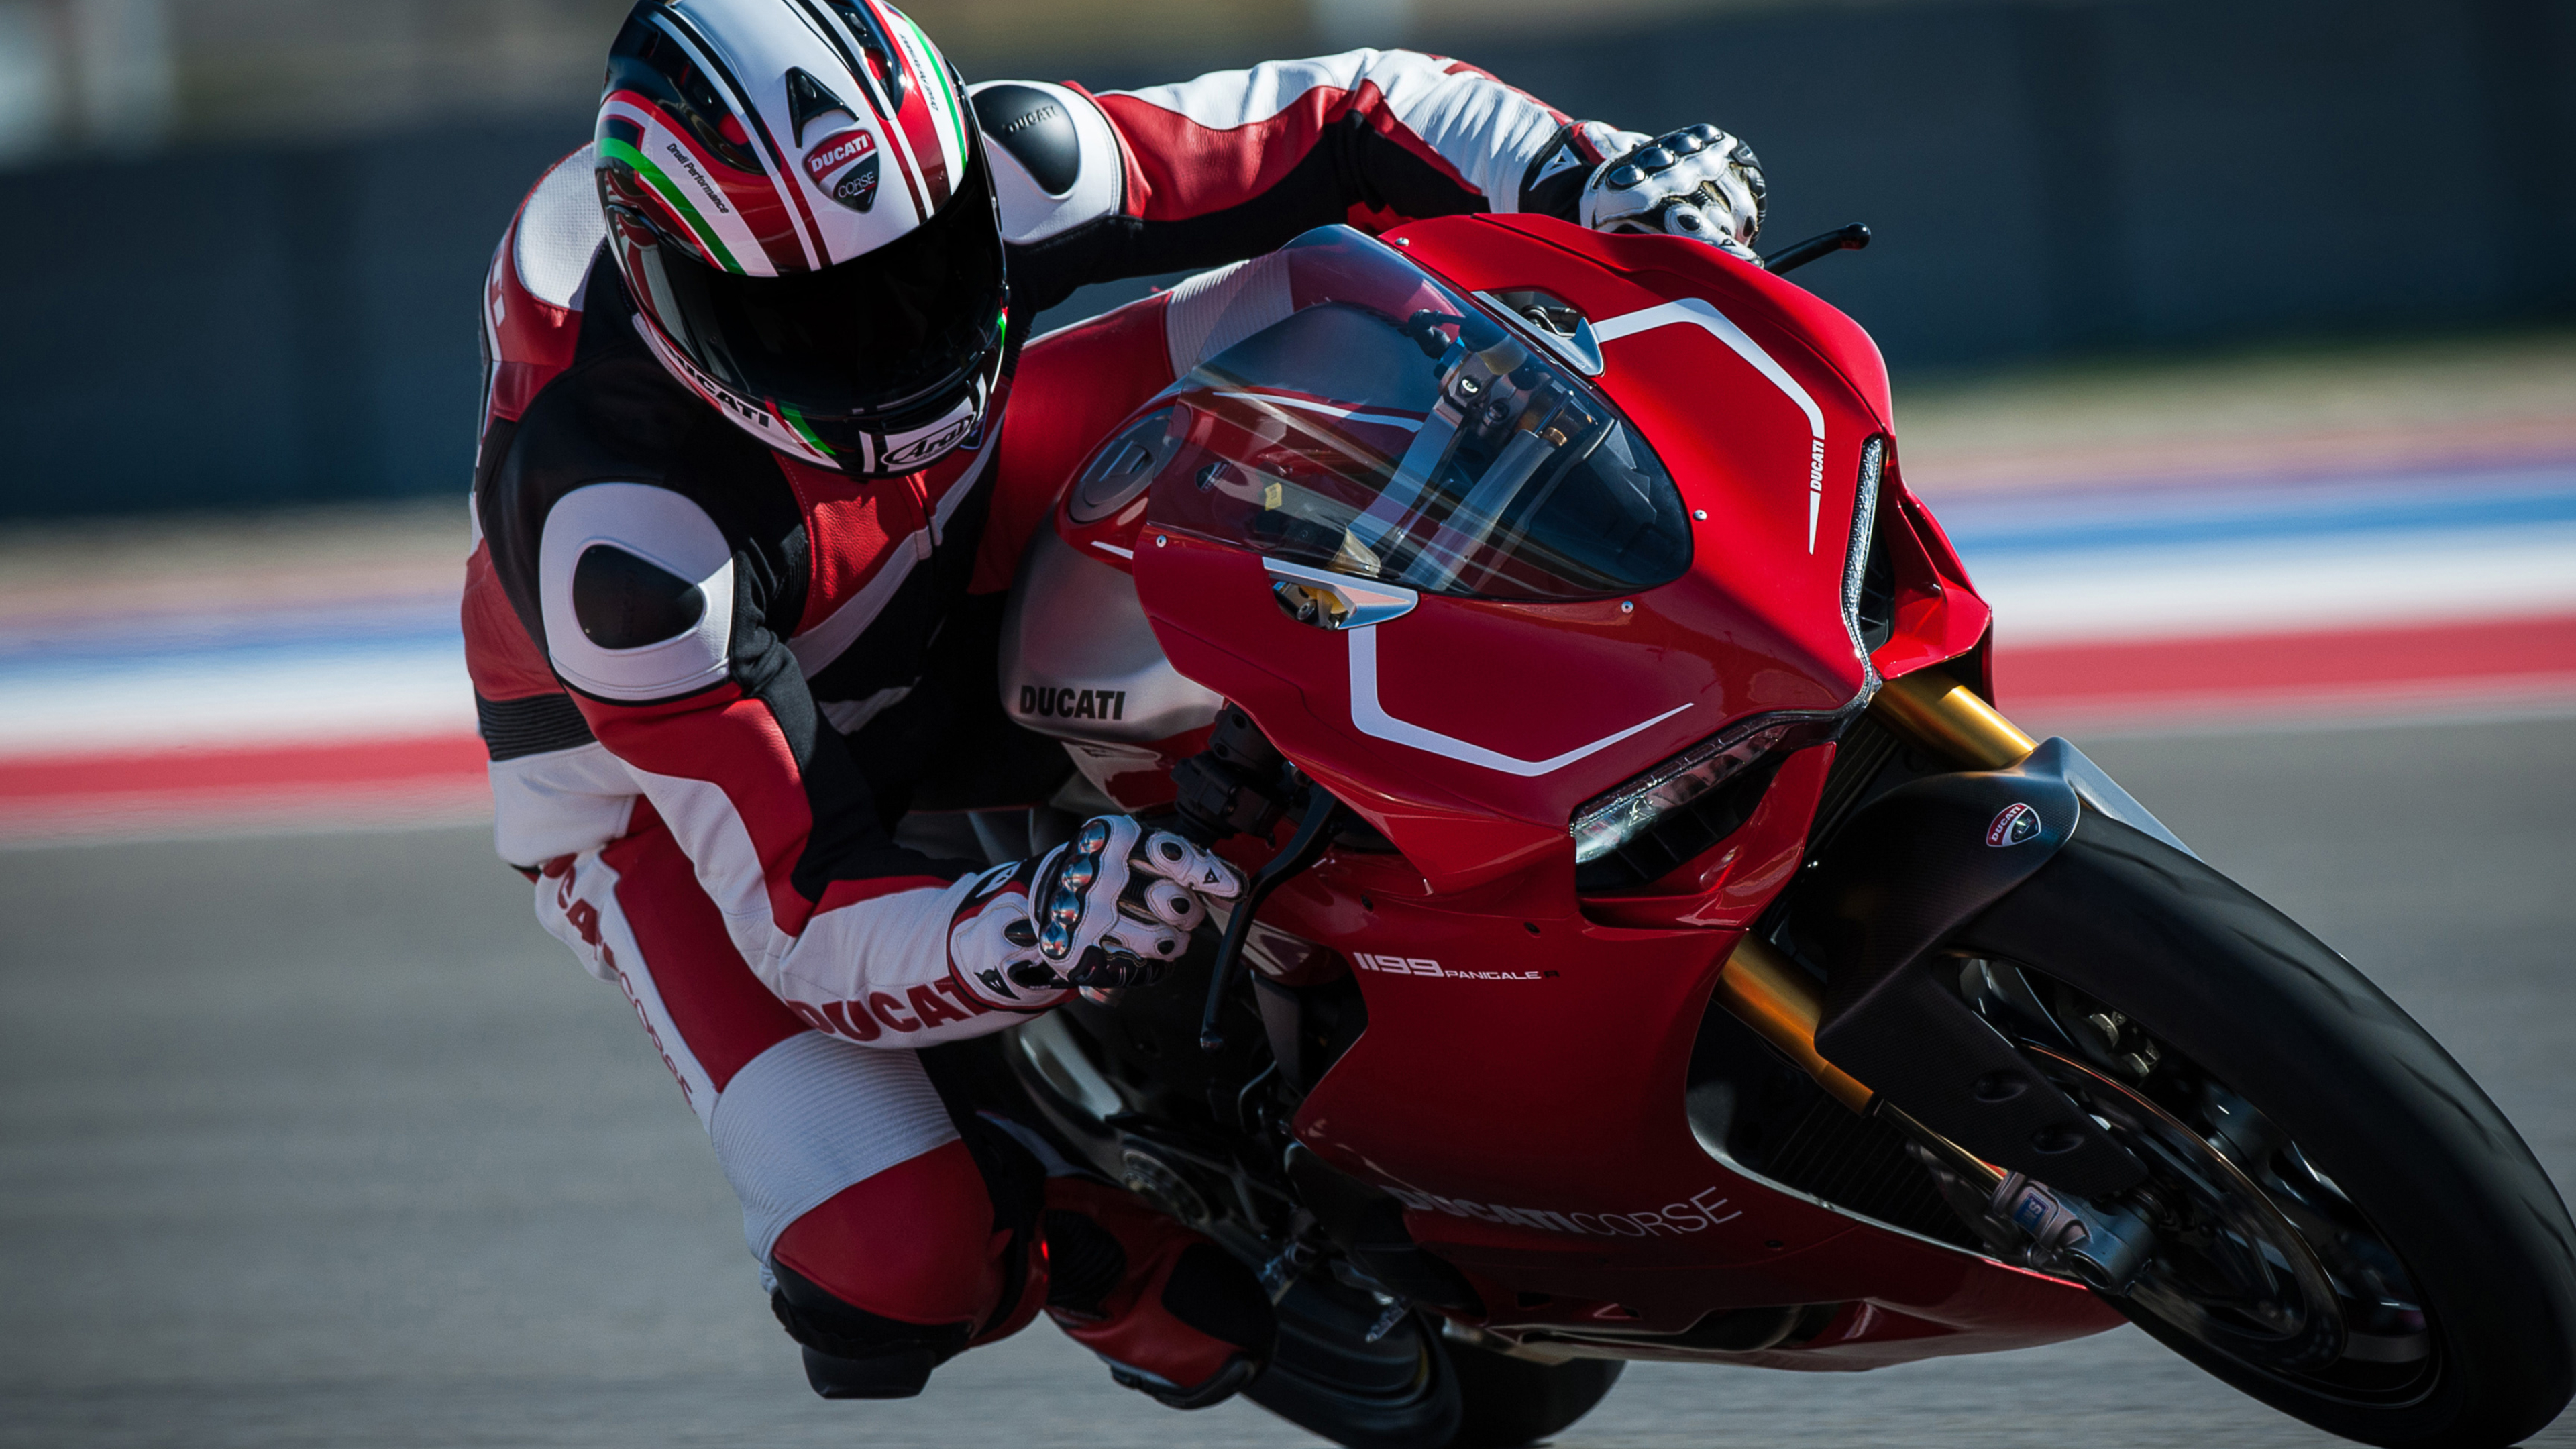 Superbike: Ducati 1199 Panigale, A sports motorcycle, A professional moto racer. 3840x2160 4K Wallpaper.